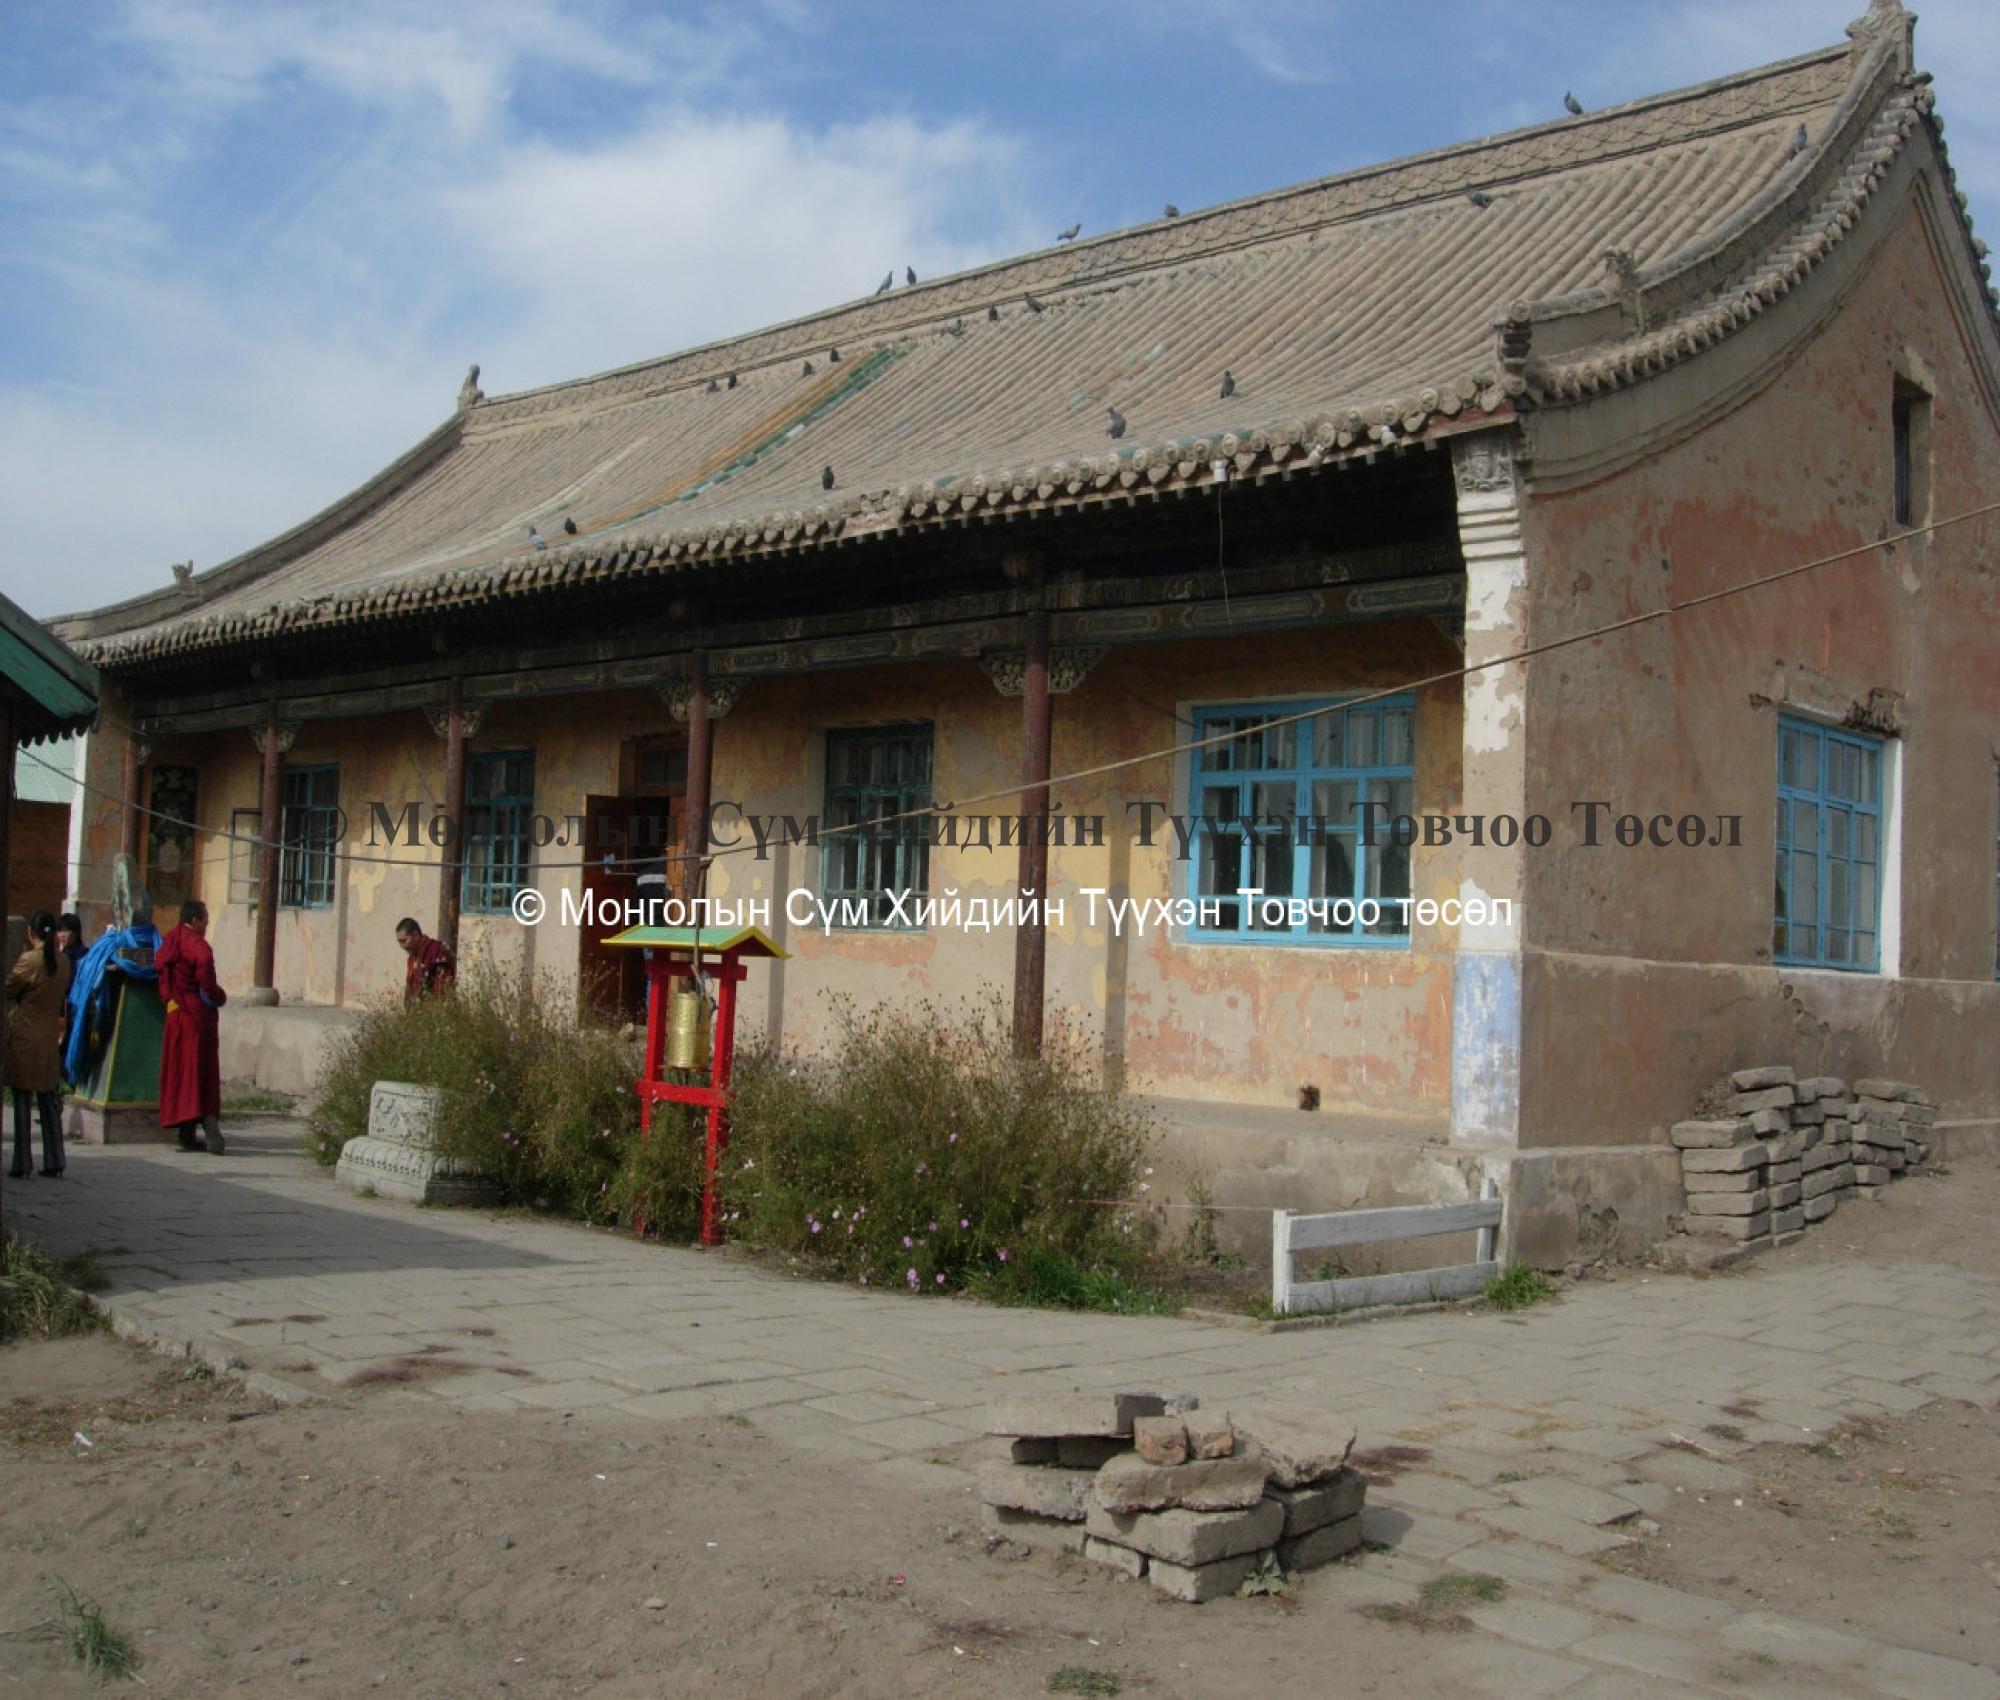 Front of the old building of Zurkhai datsan from s